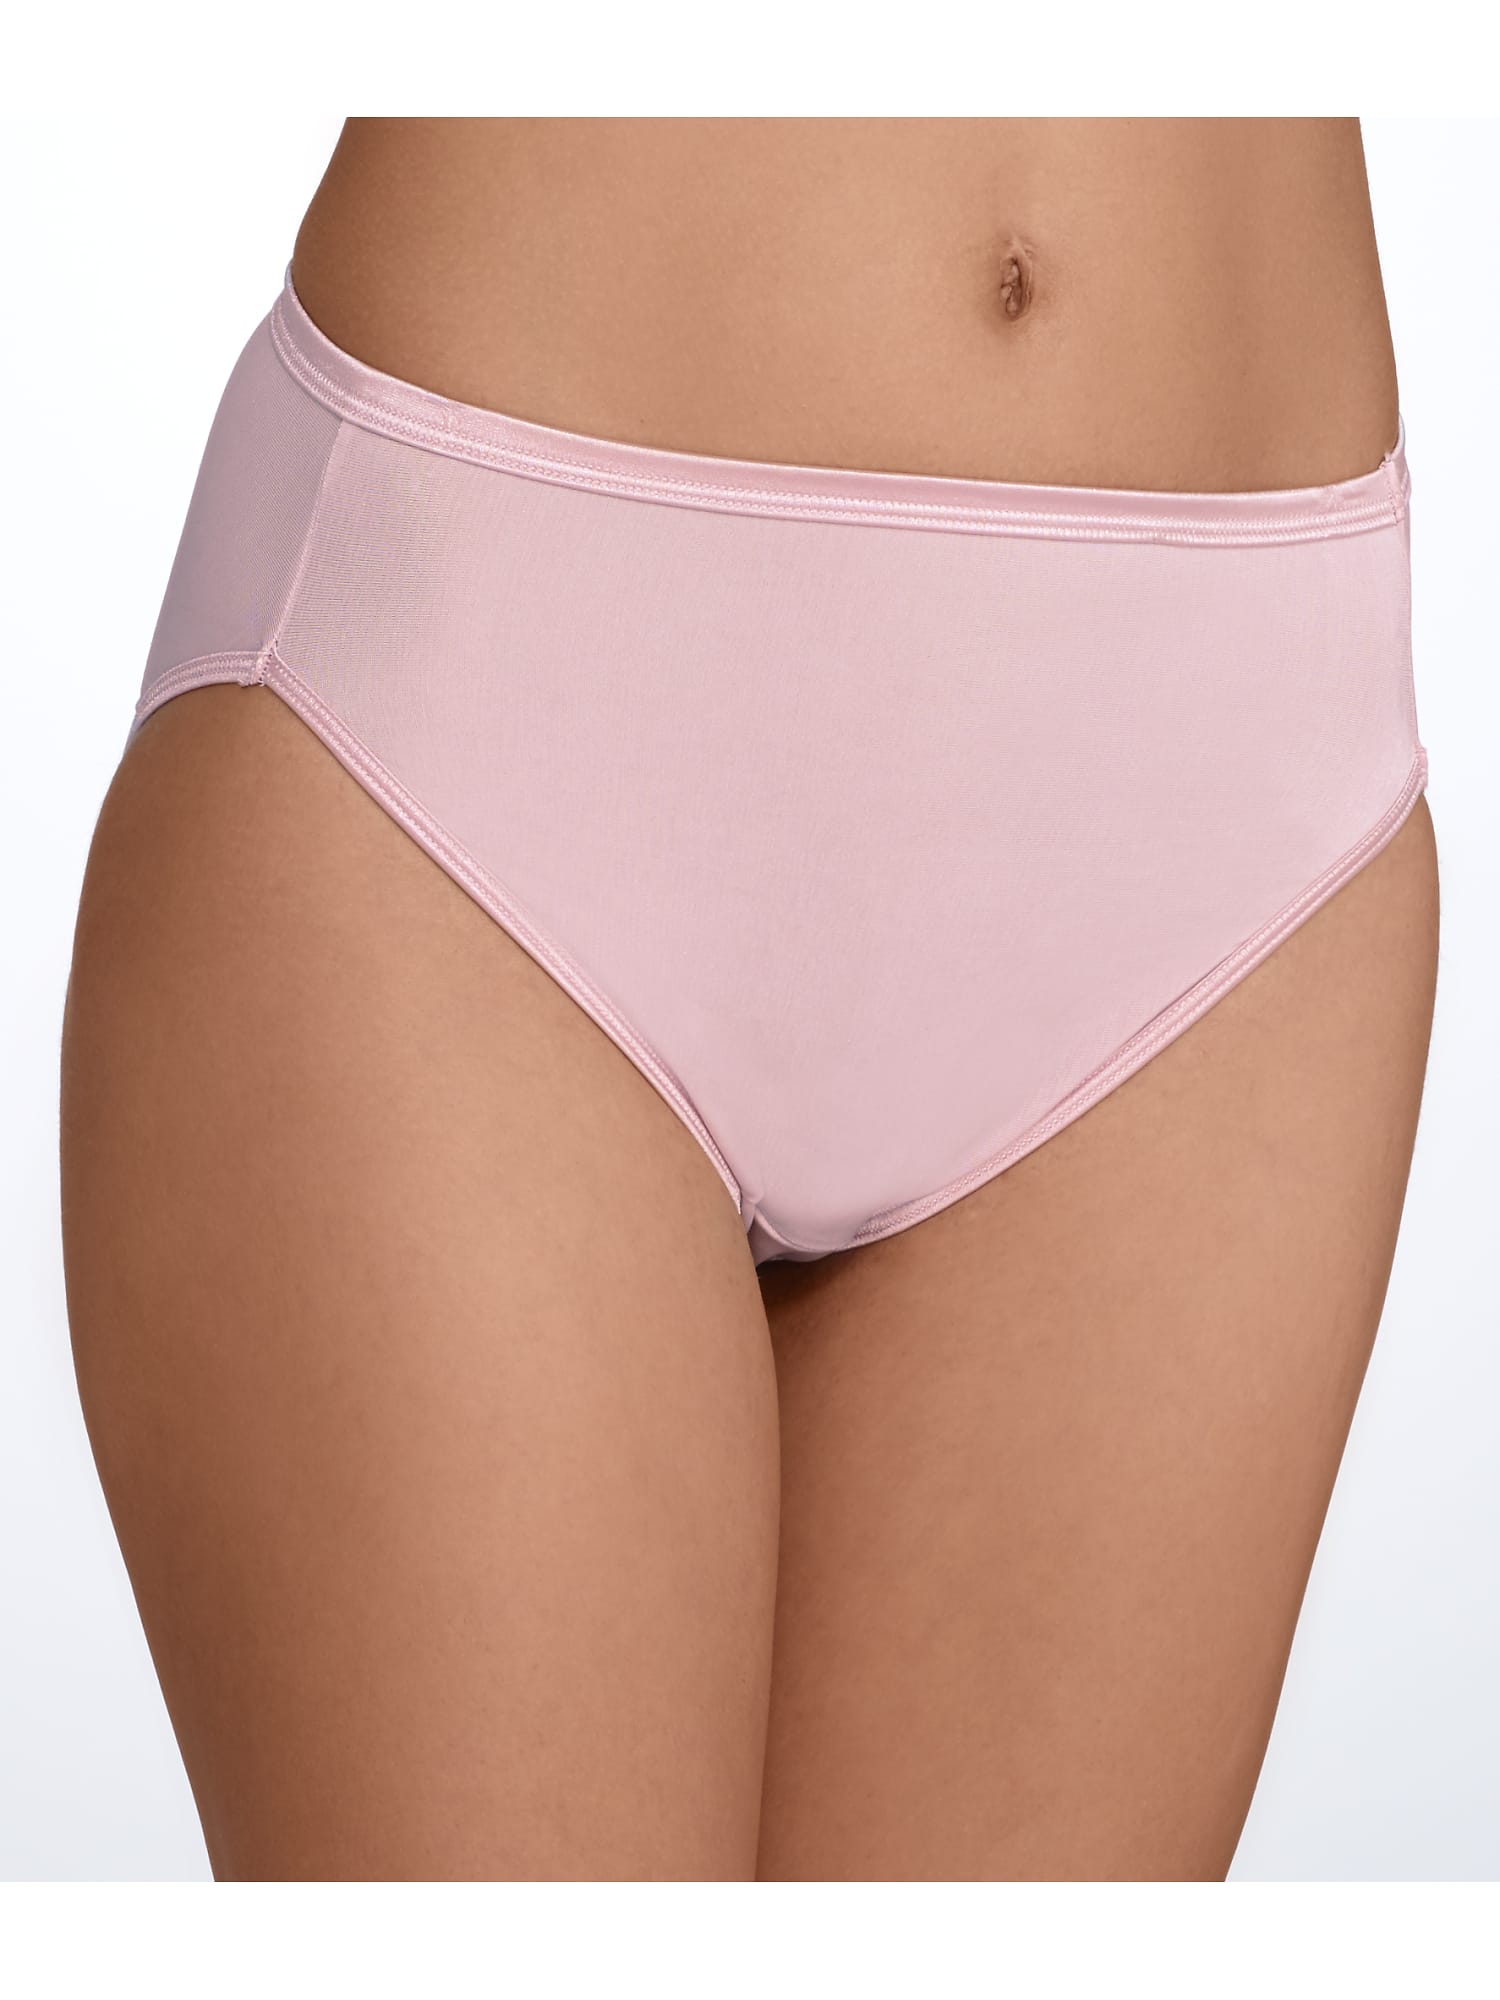 Vanity Fair 13109 Brief Illumination Panty, Size 7 for sale online